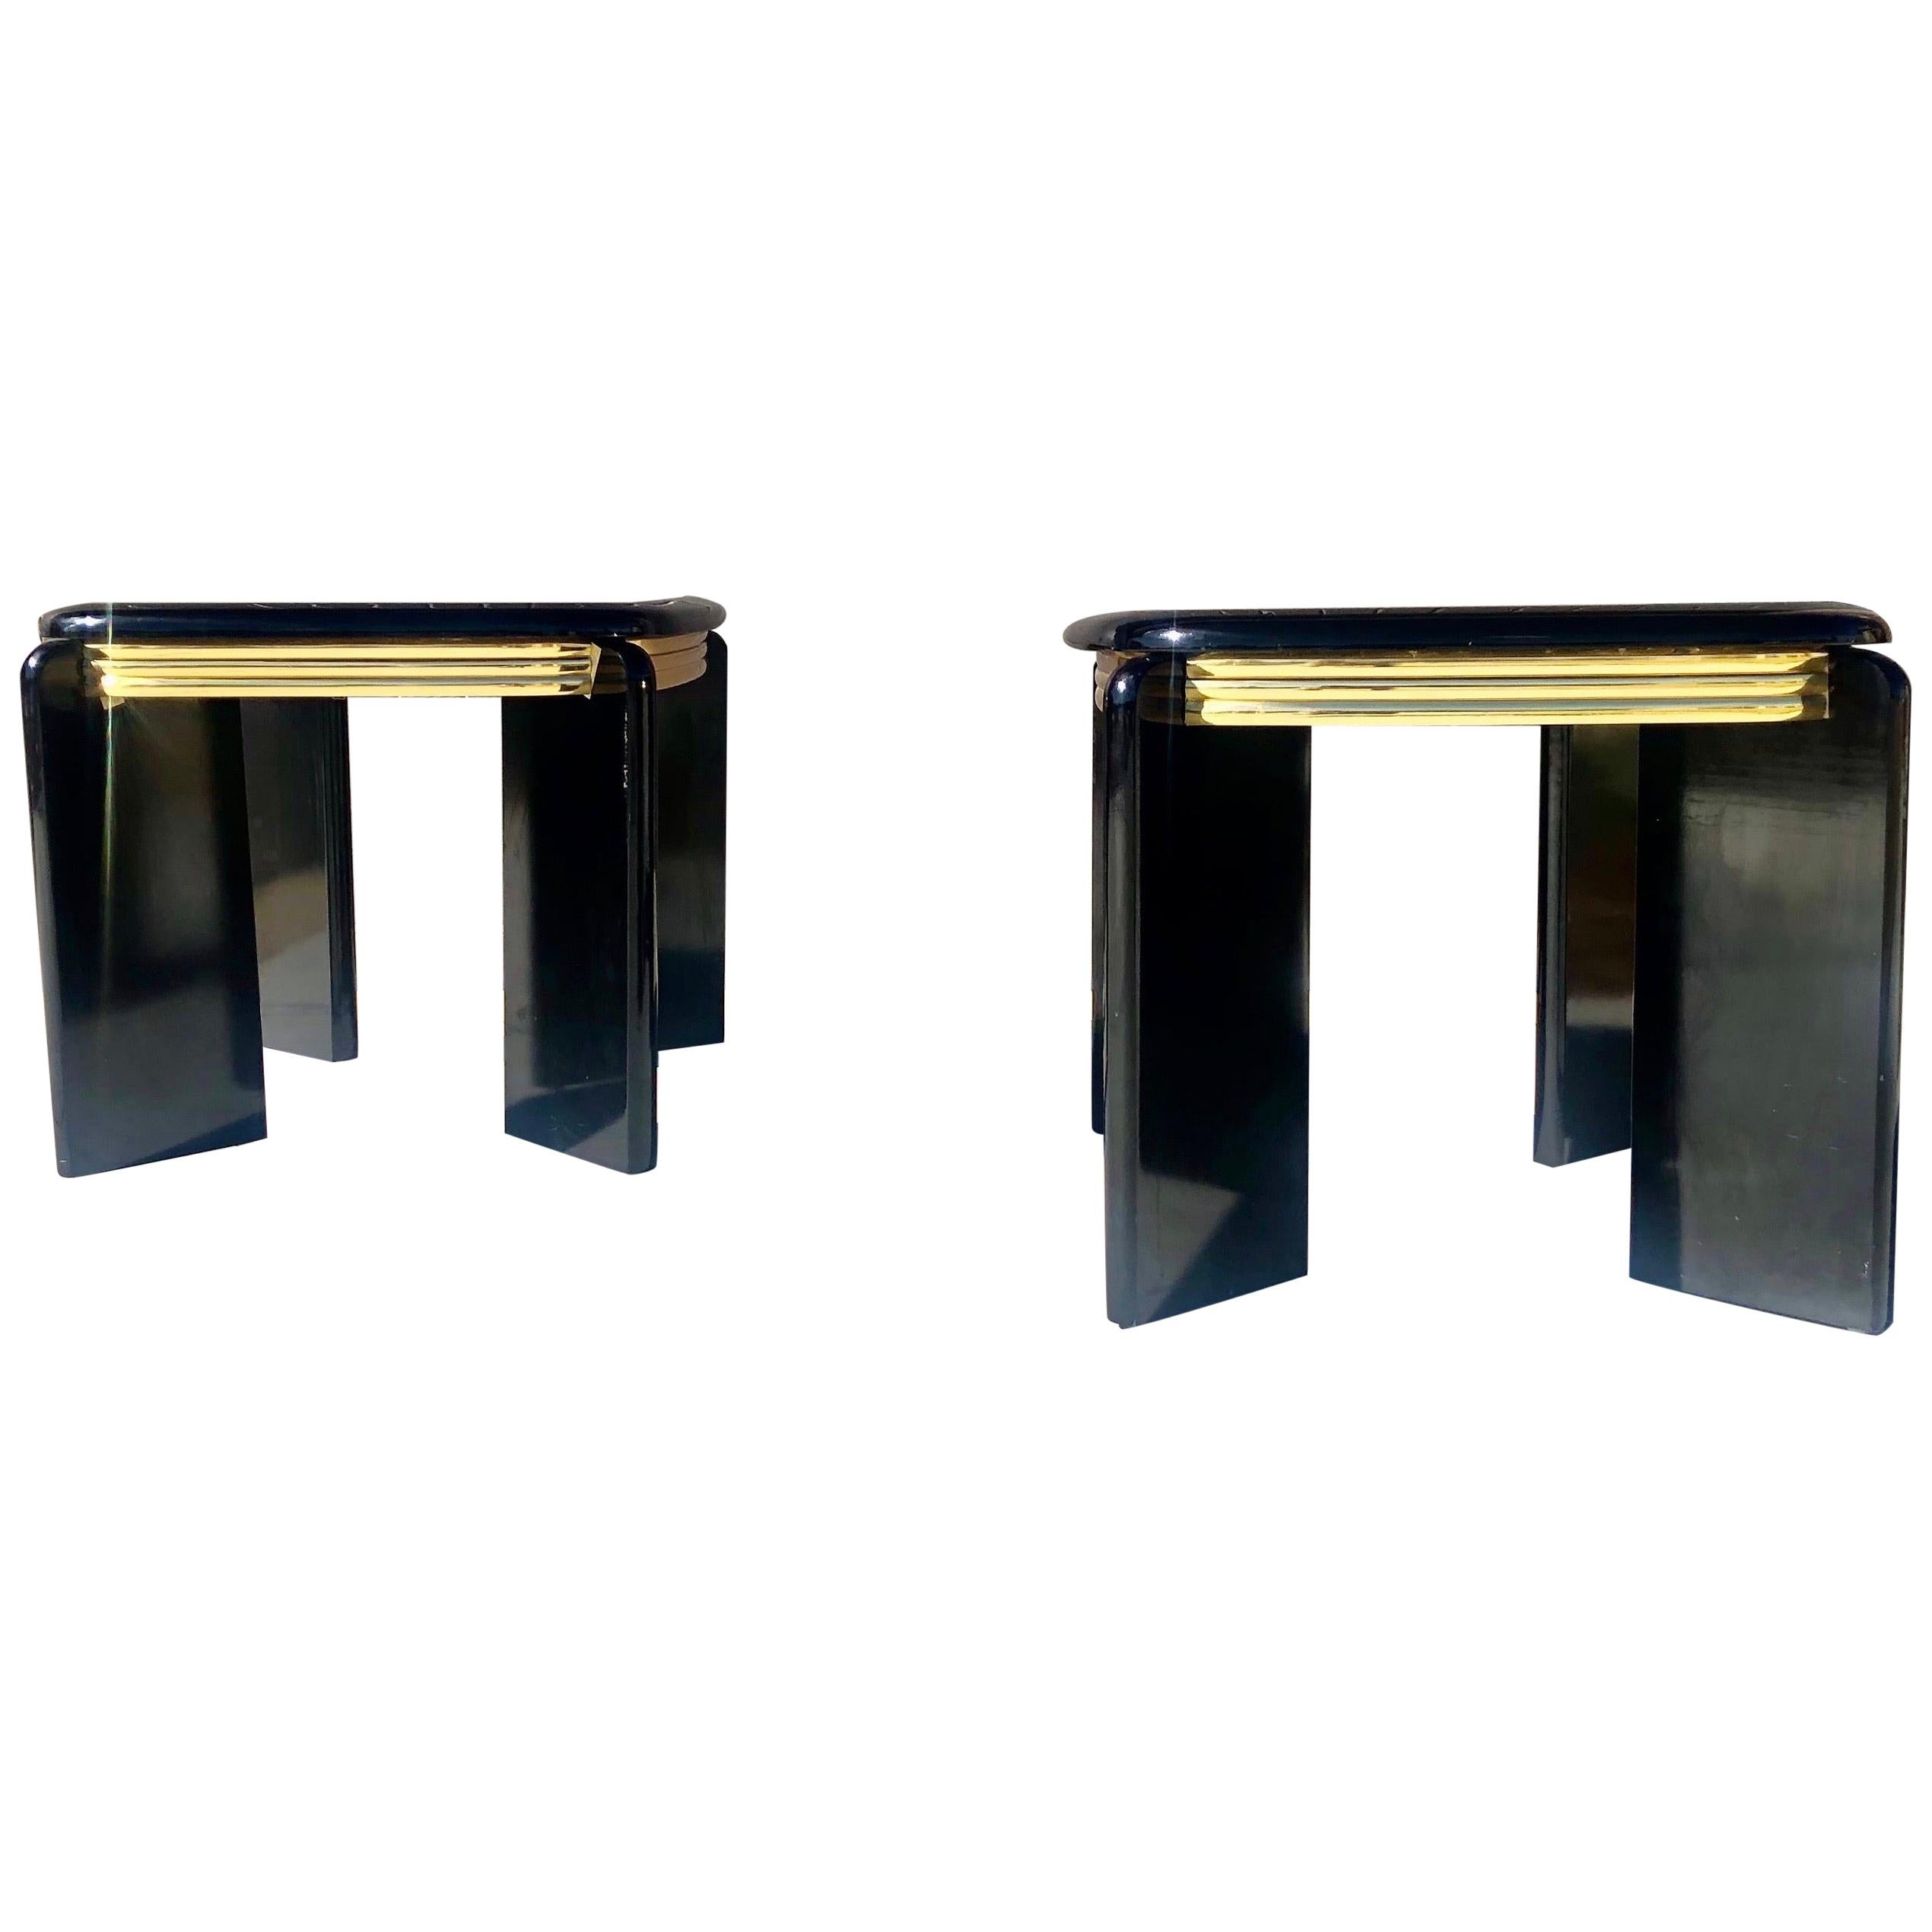 1980s Black Lacquer and Brass Side Tables